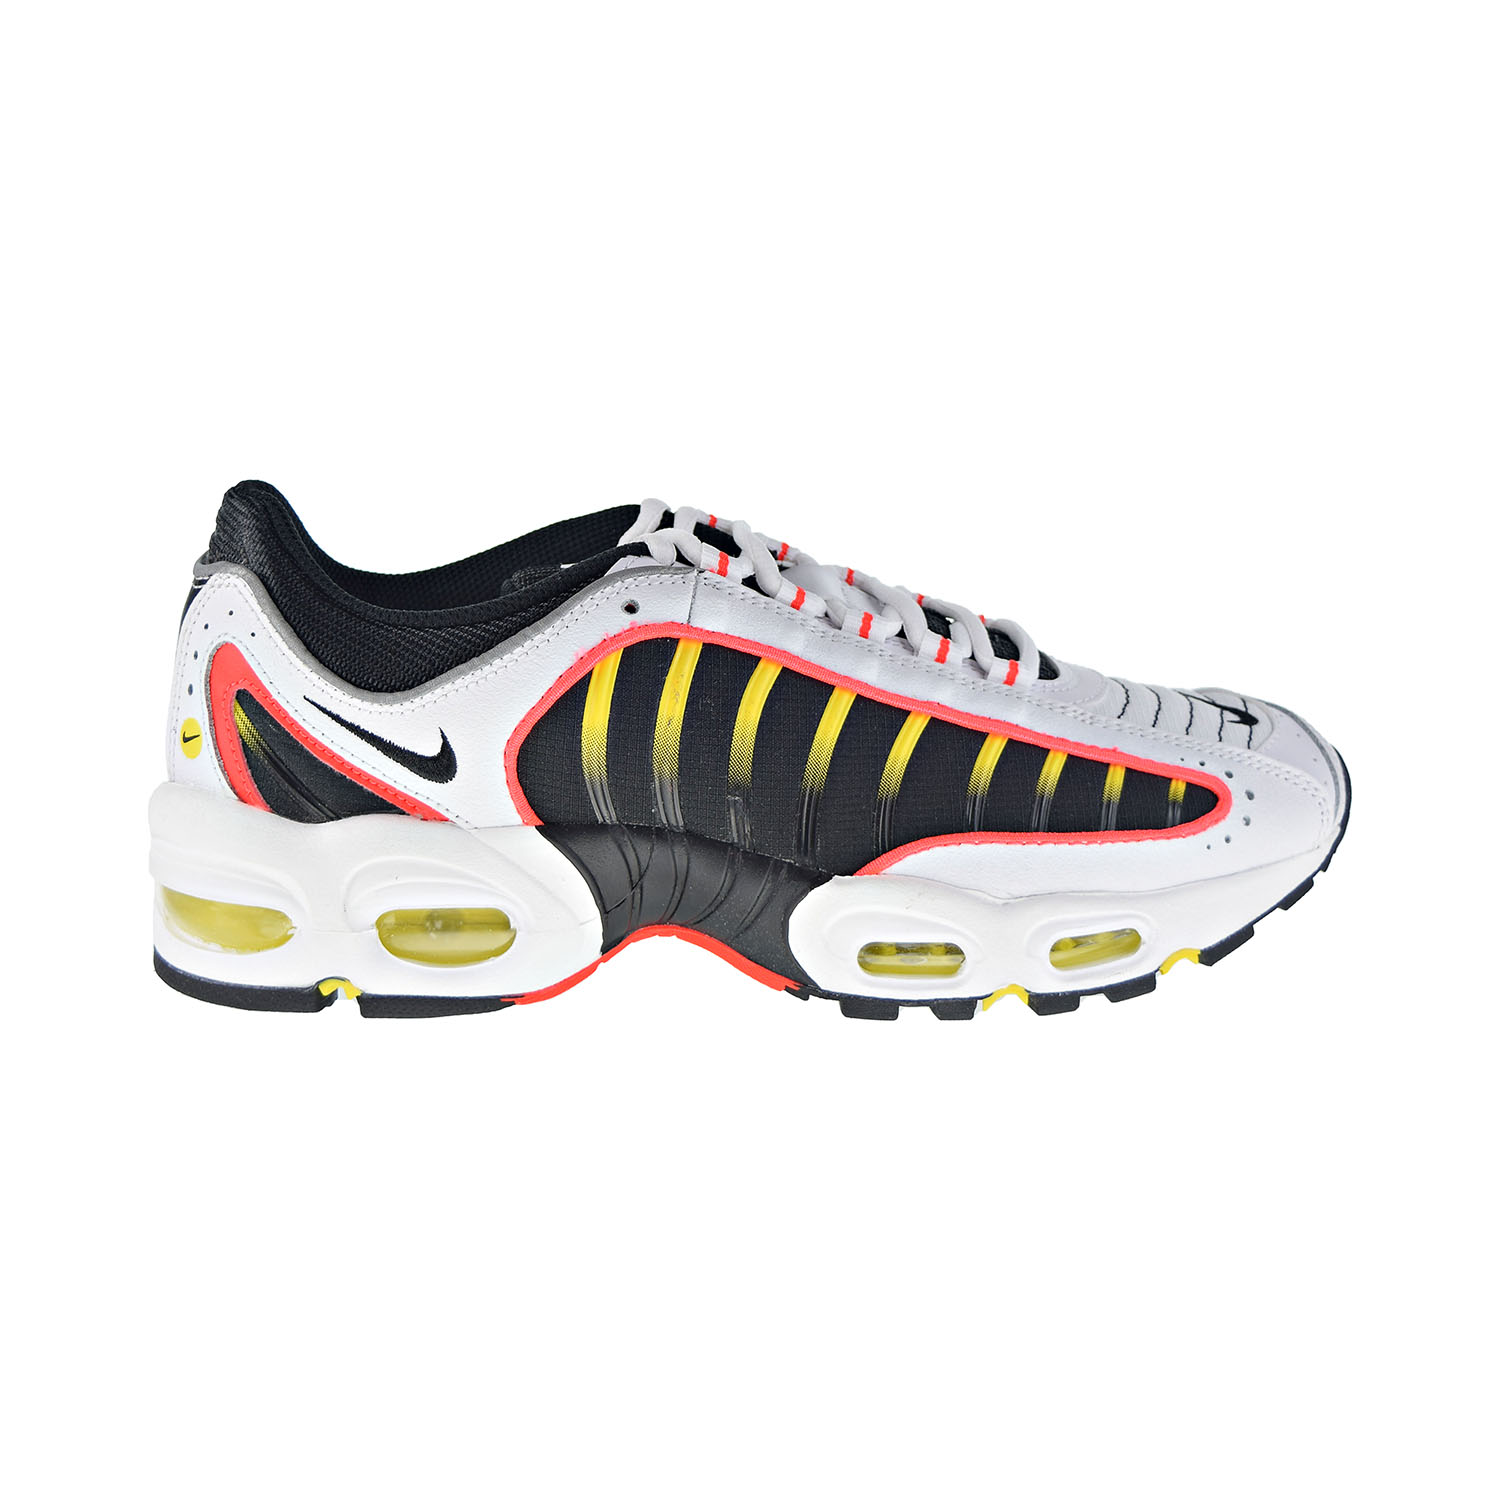 Nike Air Max Tailwind IV Men's Shoes 